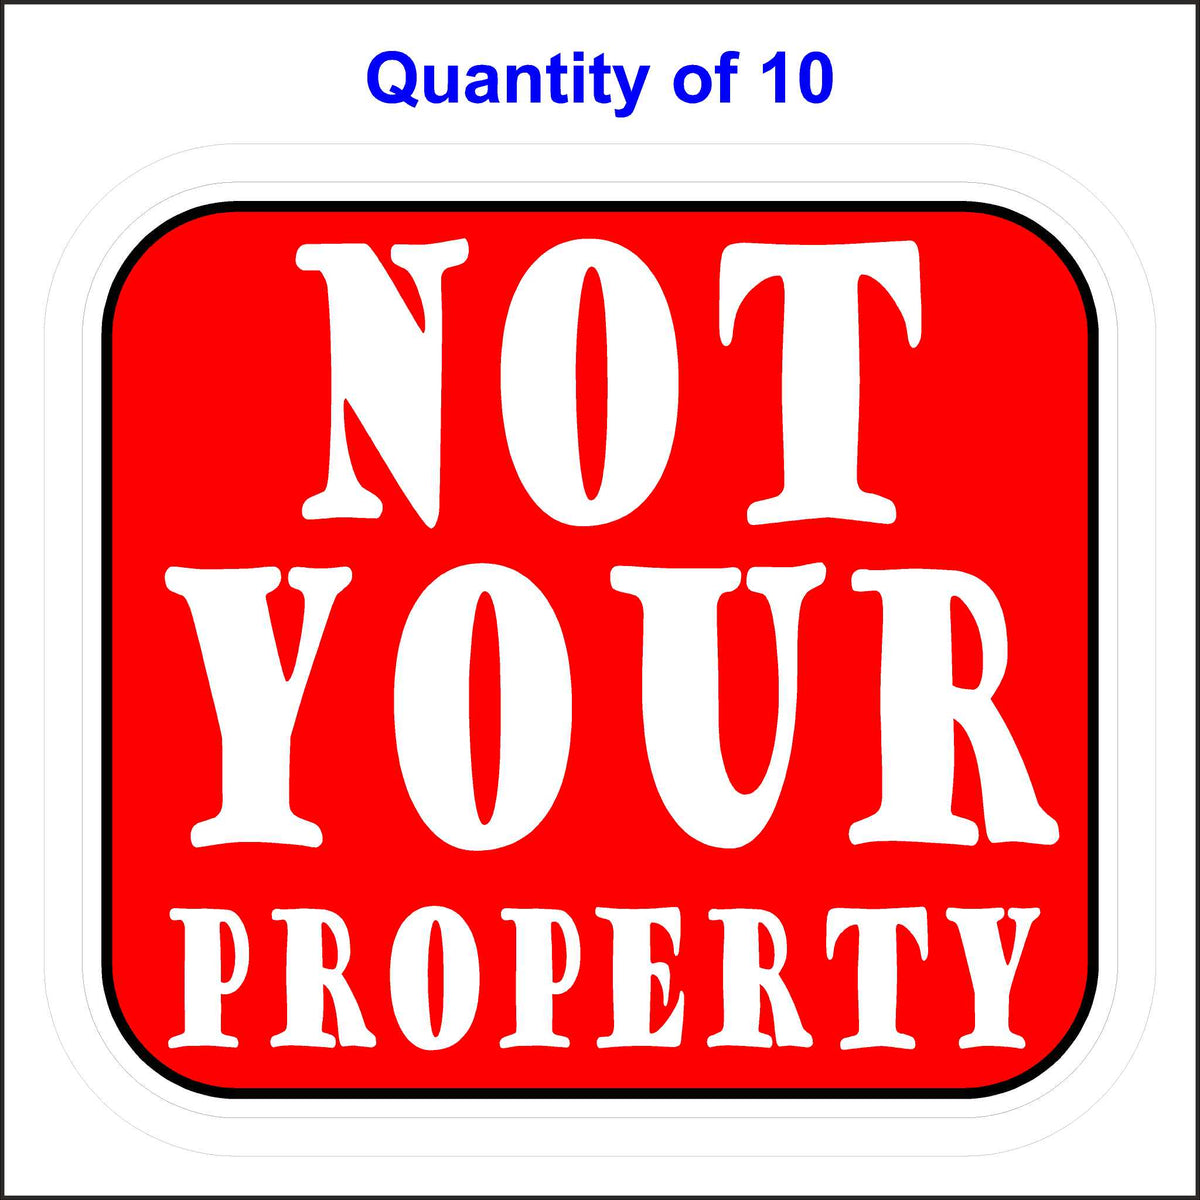 Not Your Property Sticker. Red Background With White Lettering. 10 Quantity.